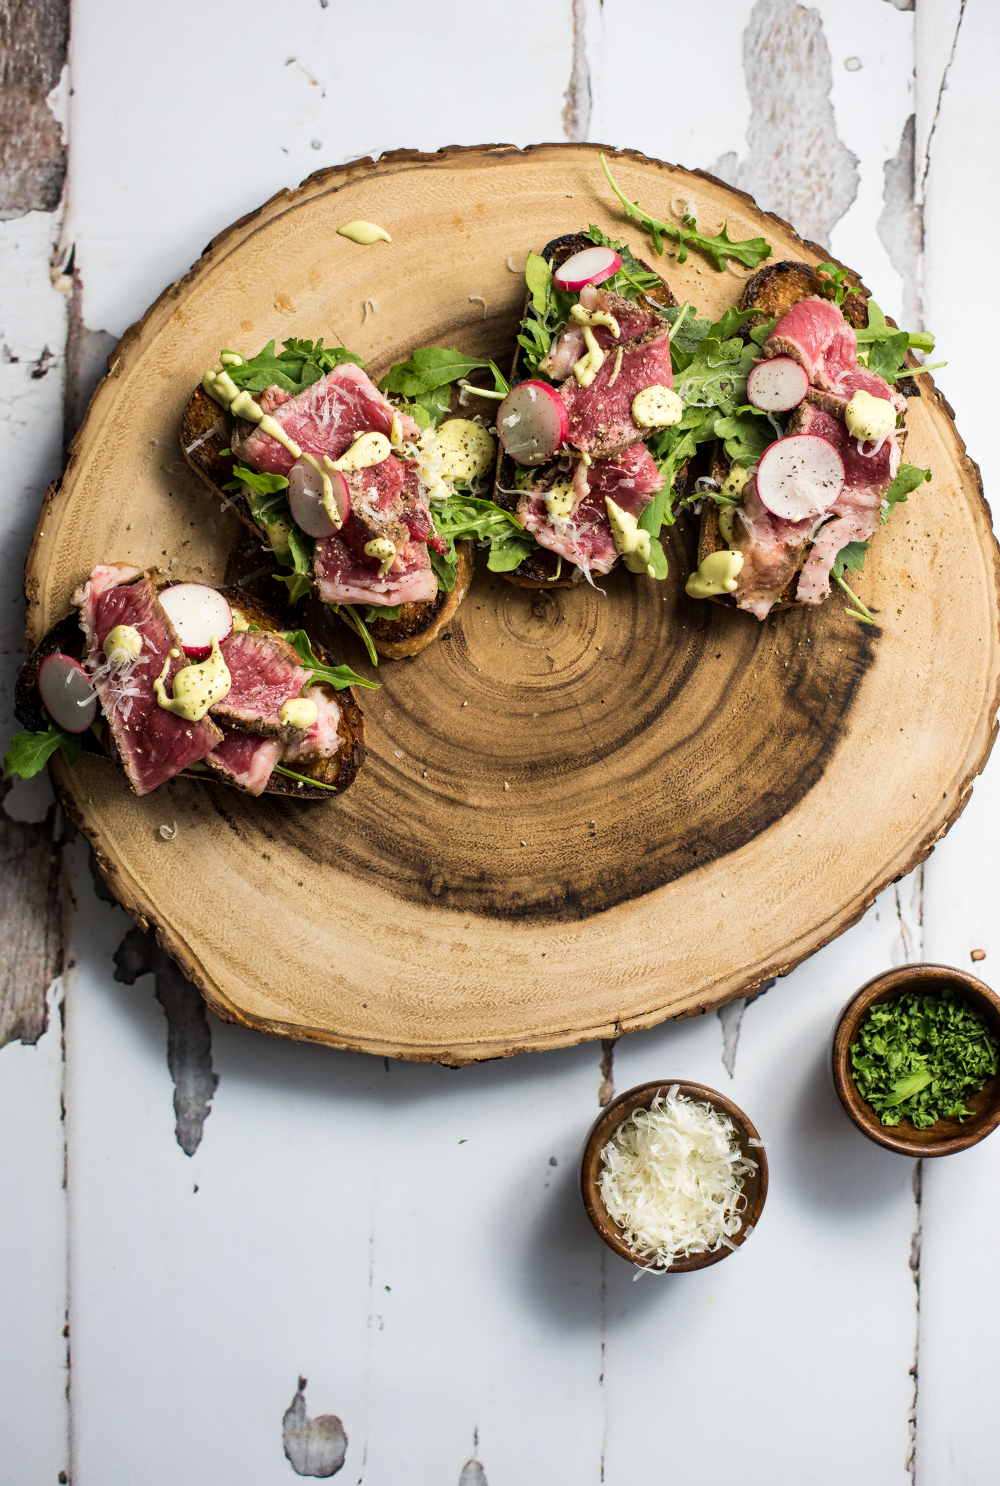 Open-Faced Steak Sandwiches with Parmesan Avocado Cream are the perfect appetizer or quick lunch recipe. Serve them at your next get together!